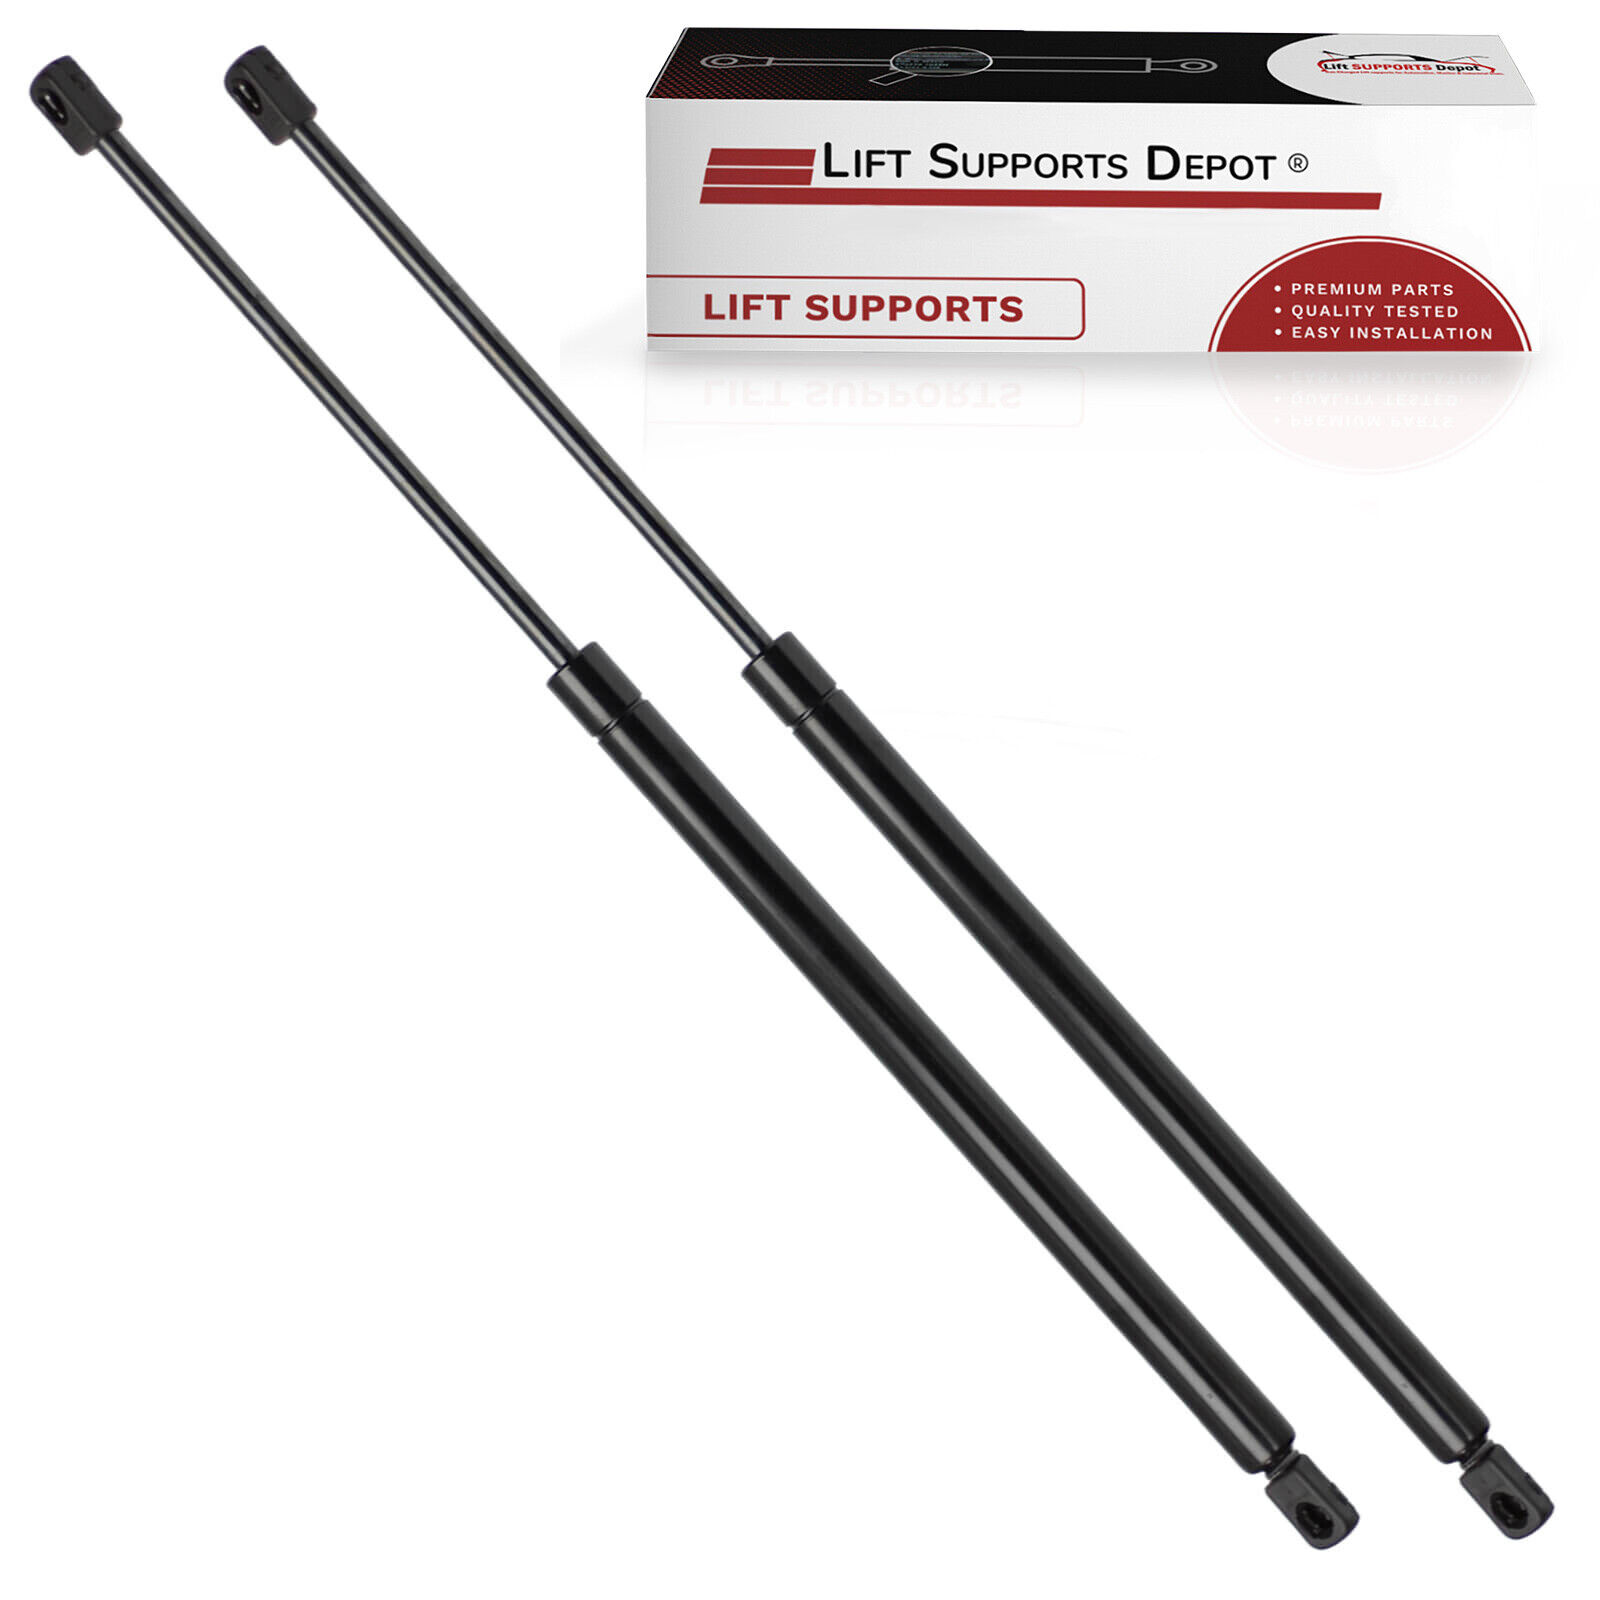 Qty 2 Fits Volkswagen Golf, Gti, R32, Rabbit 2006 to 2009 Hatch Lift Supports